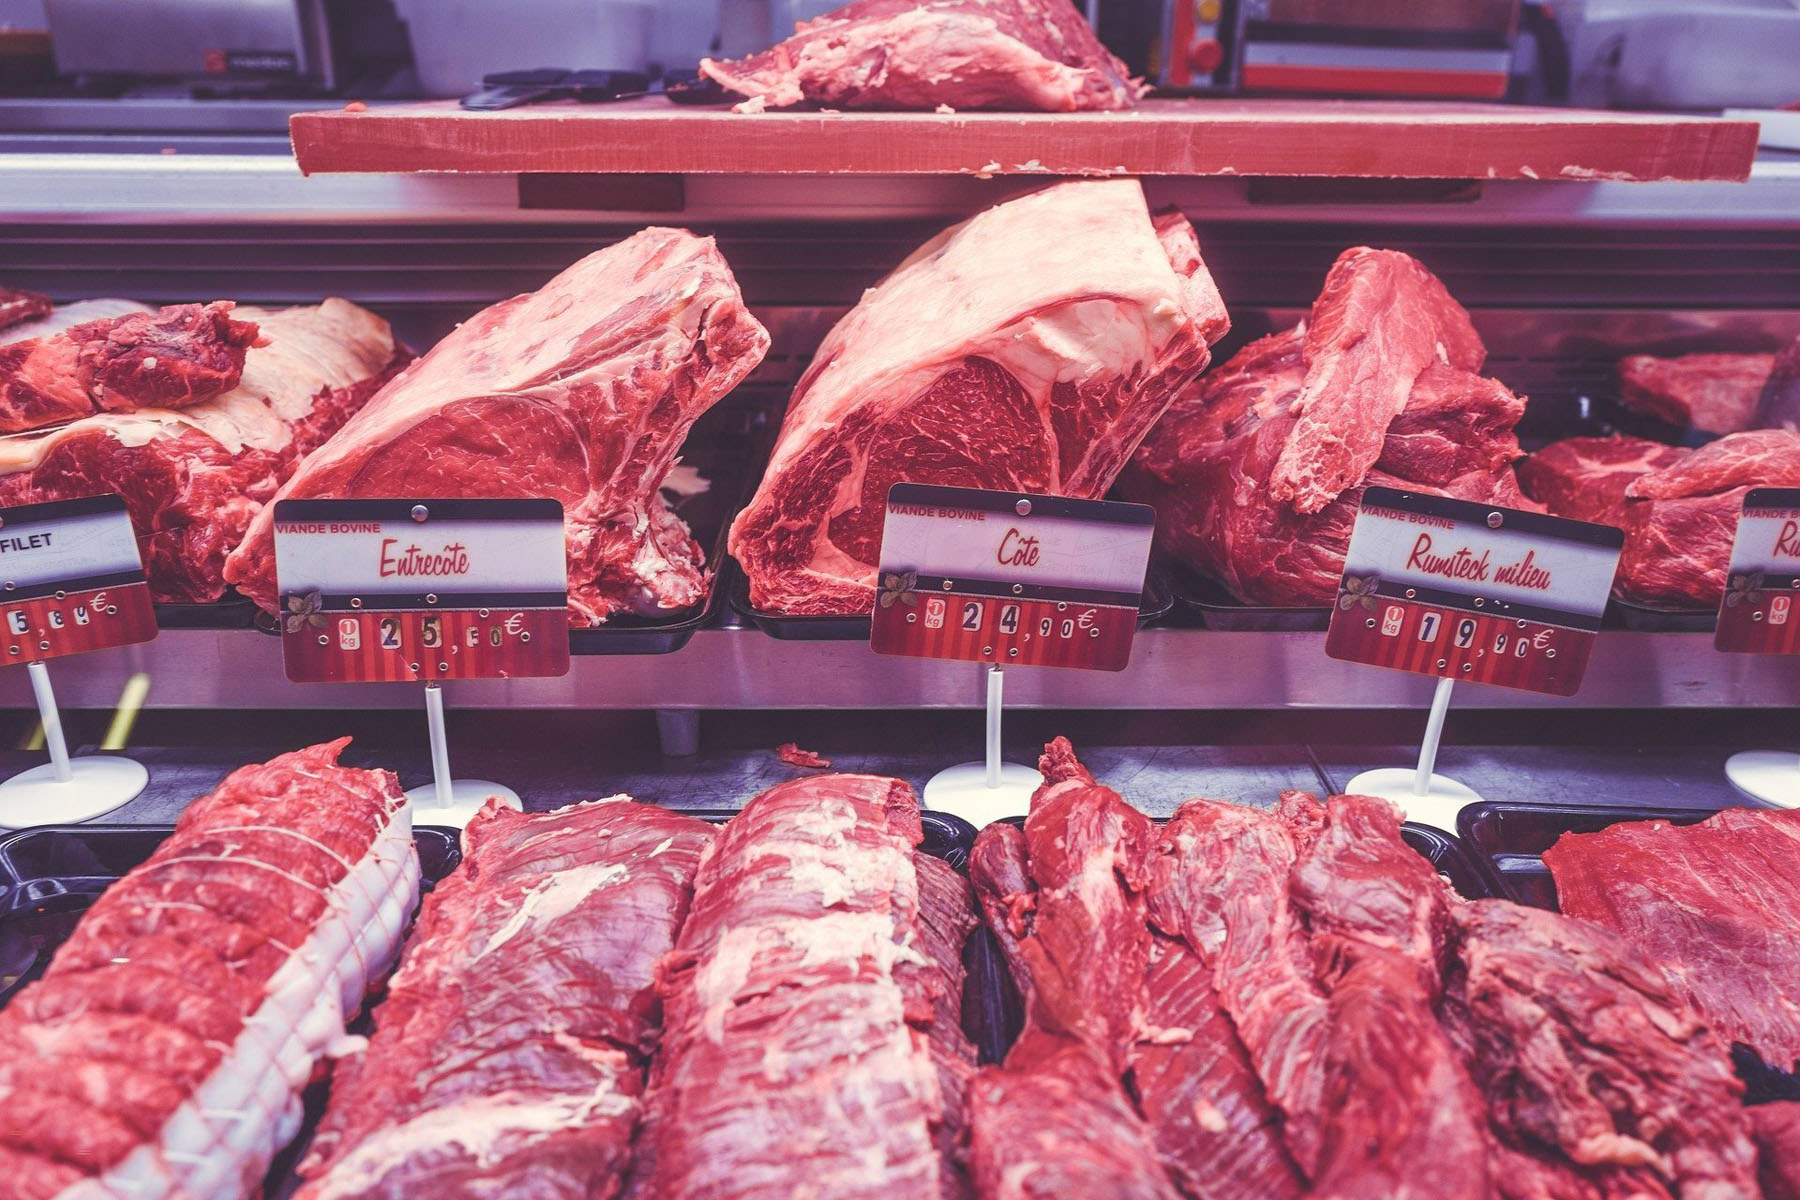 Meat up: Butchers see orders surge during coronavirus crisis